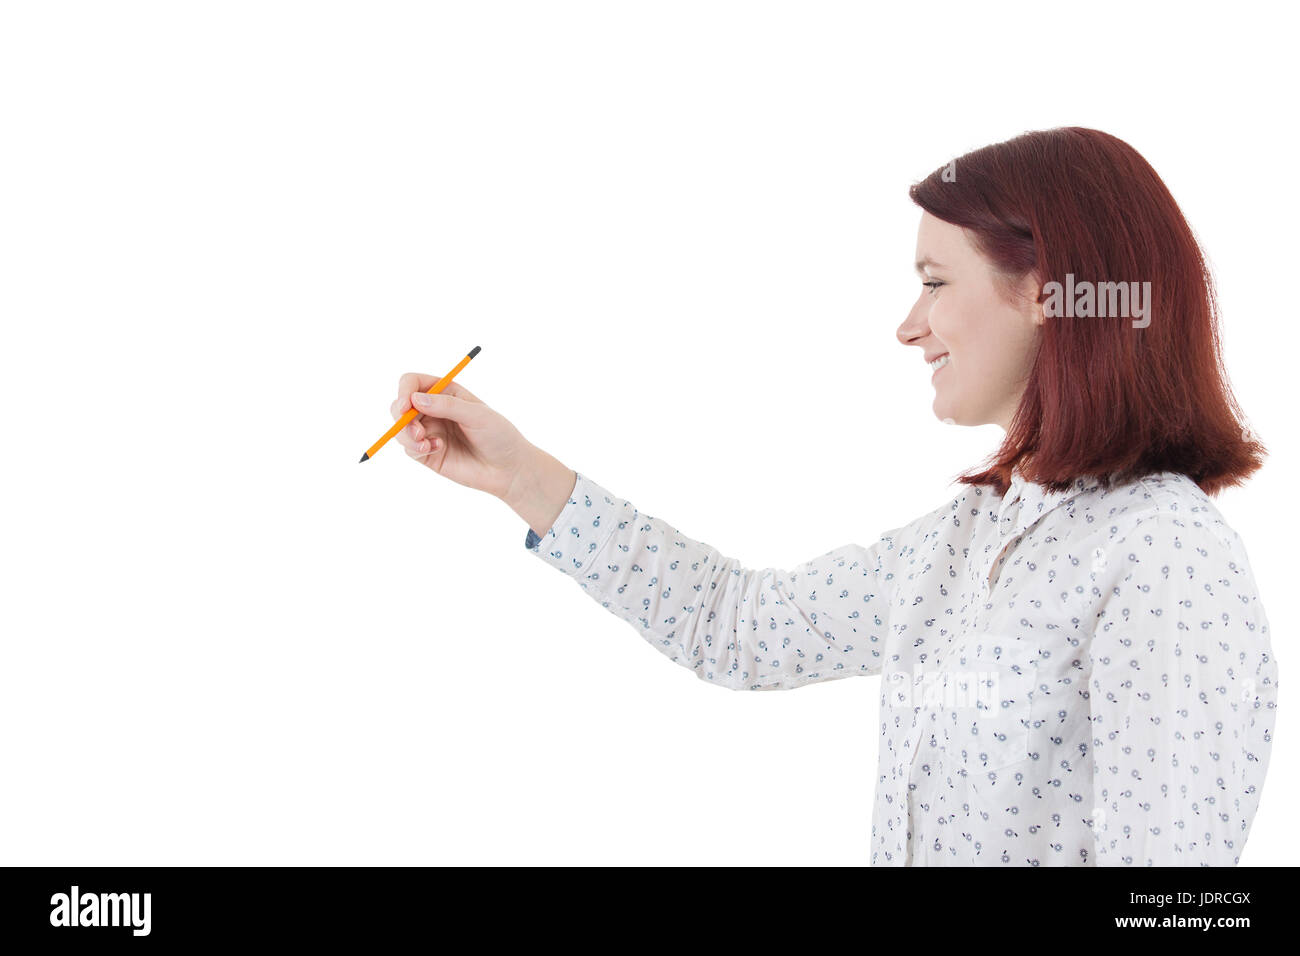 Smiling young student woman holding a pencil trying to develop her  potential.Creativity concept. Stock Photo